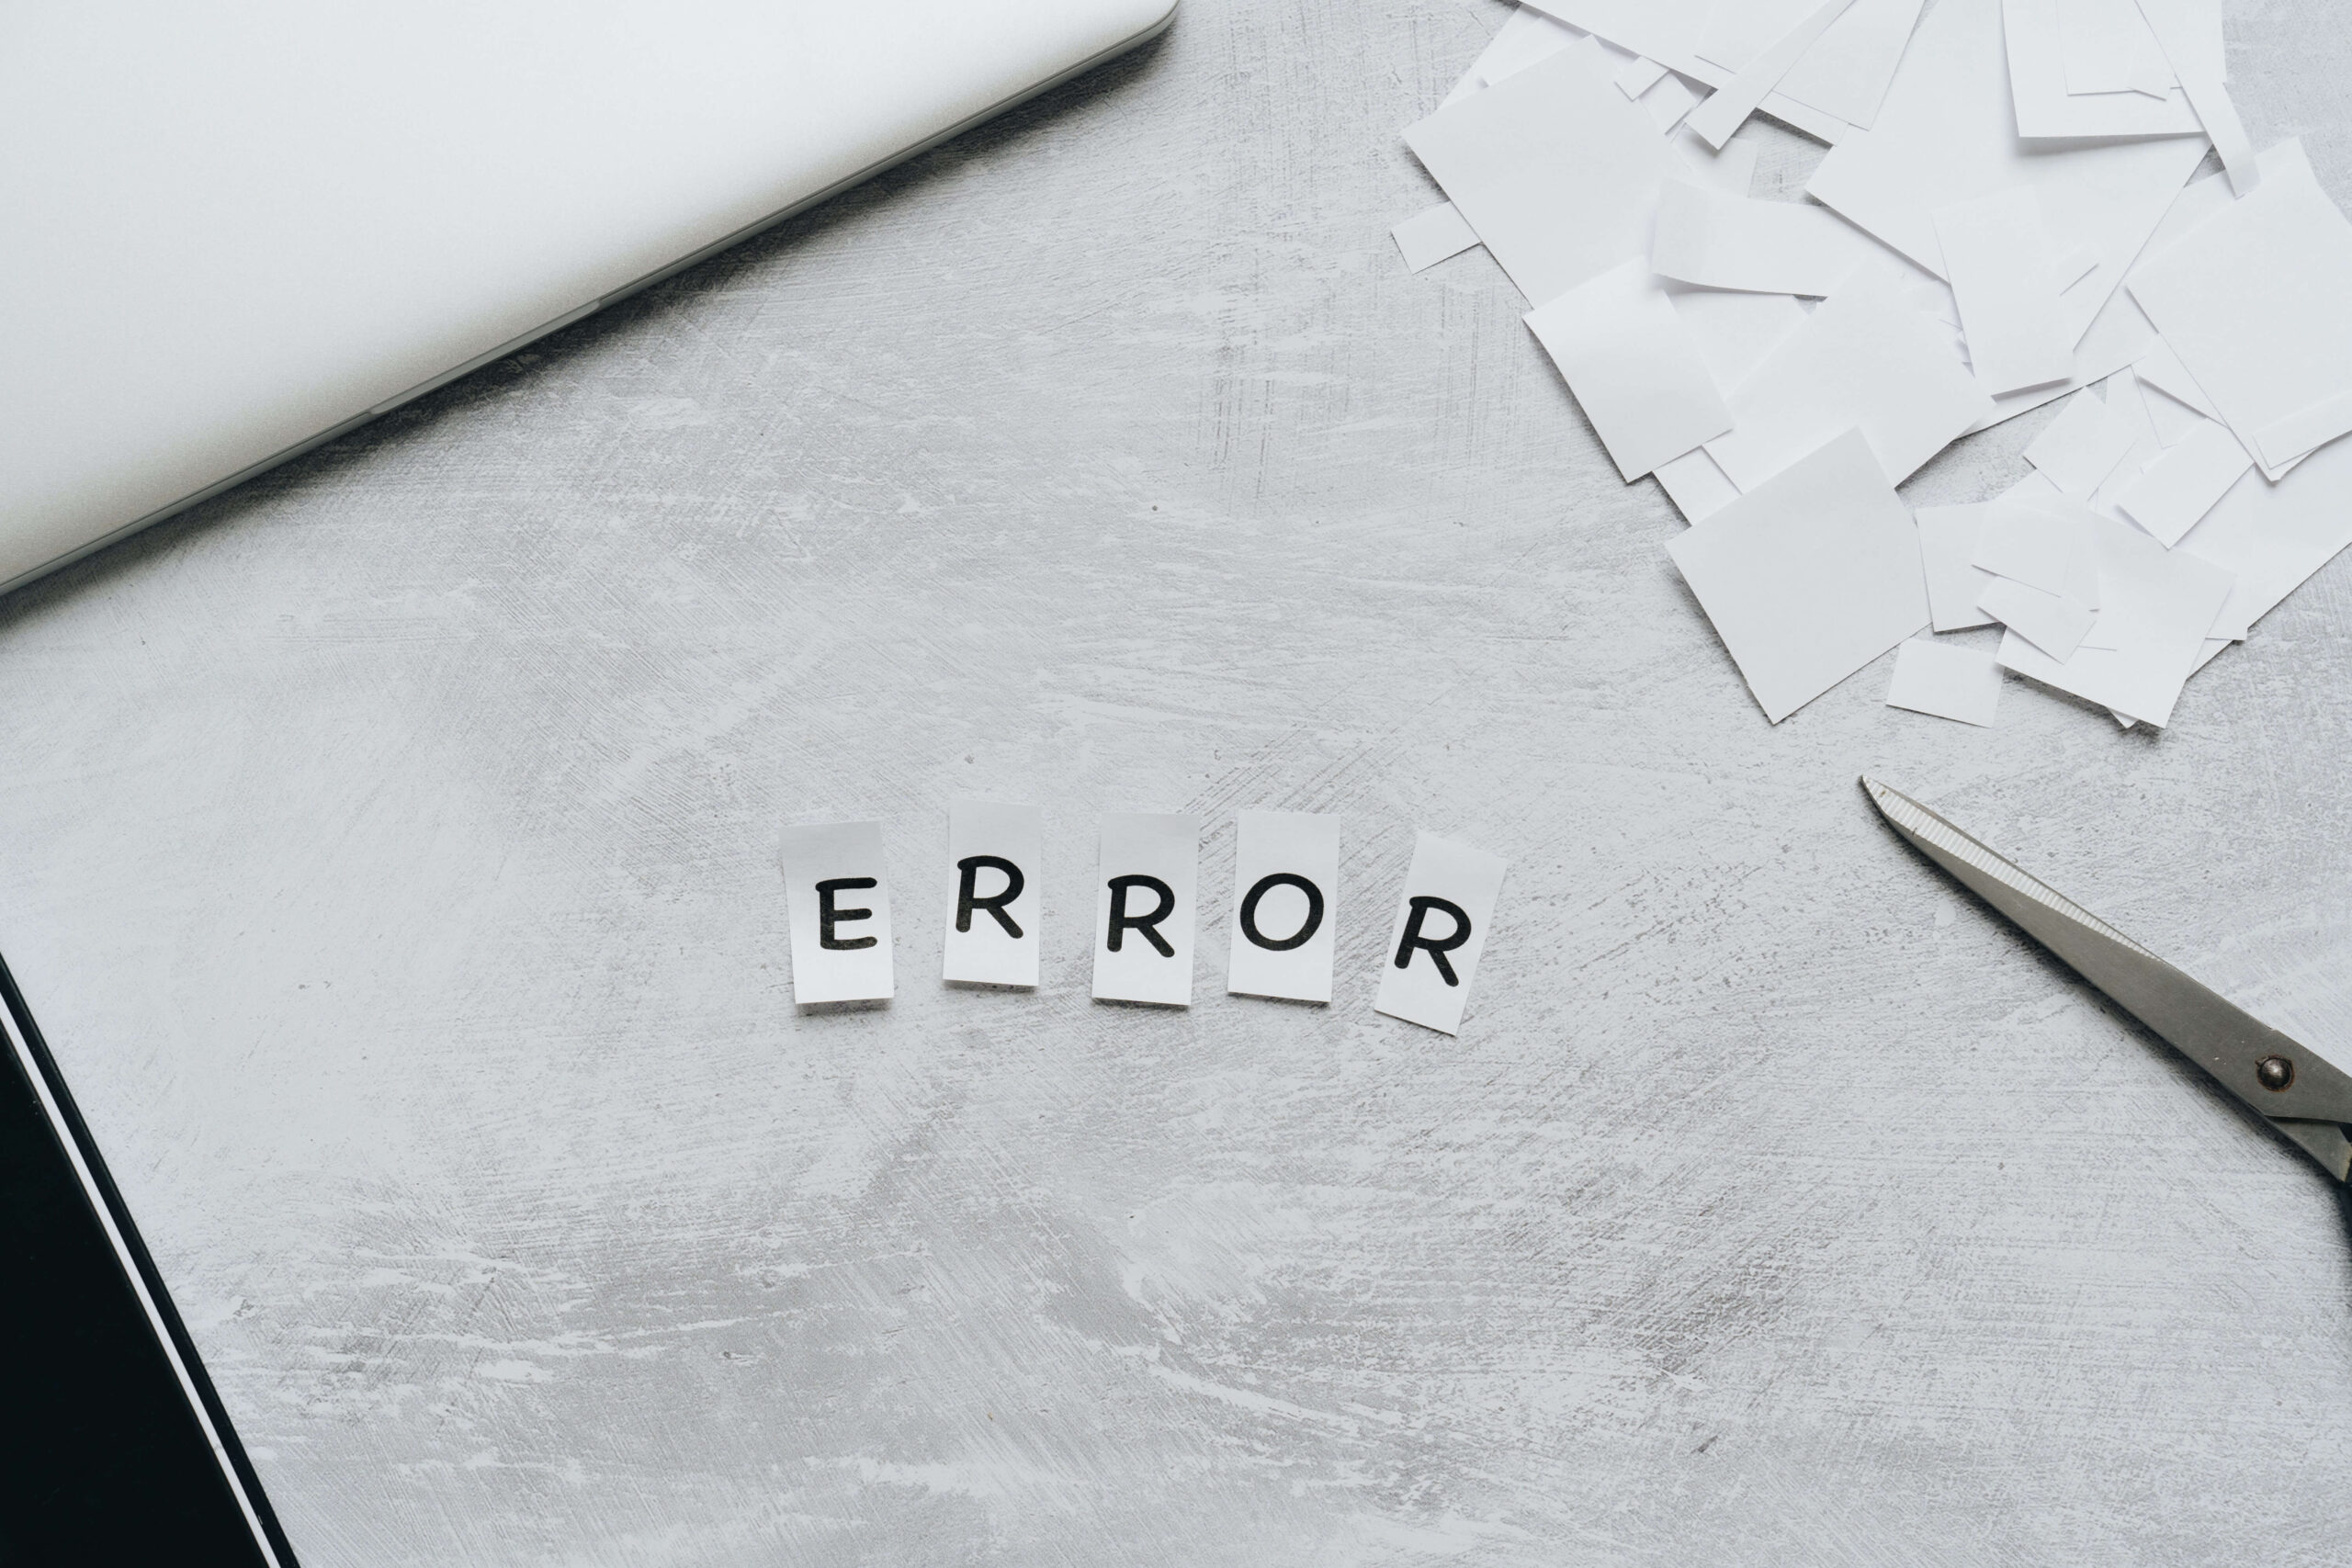 Common_SEO_Mistakes_Why_No_SEO_Results_Error